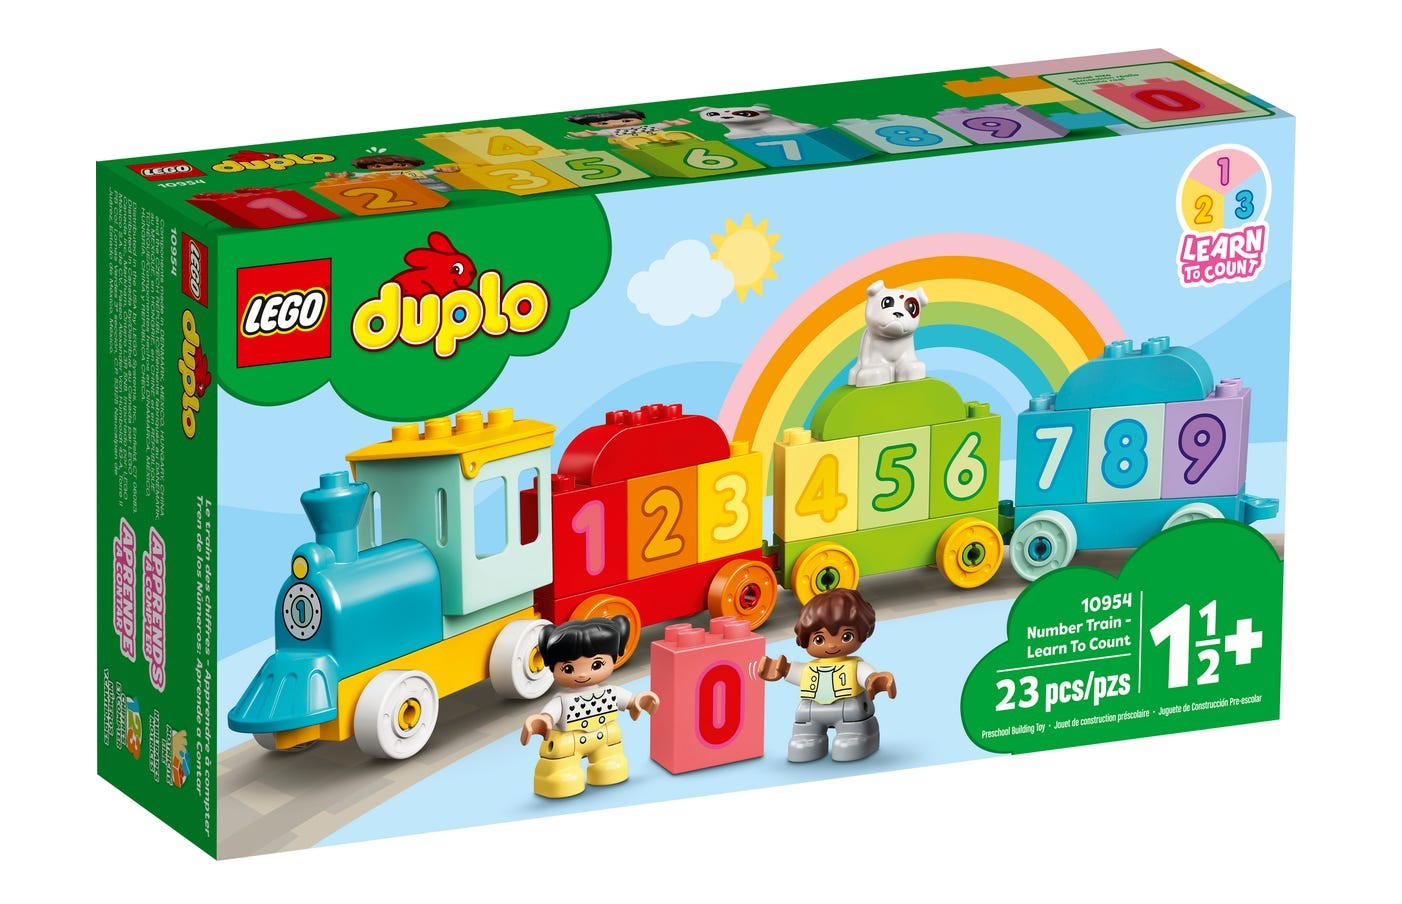 LEGO DUPLO 3 in 1 Space Shuttle Adventure Toy, Kids Role Playing